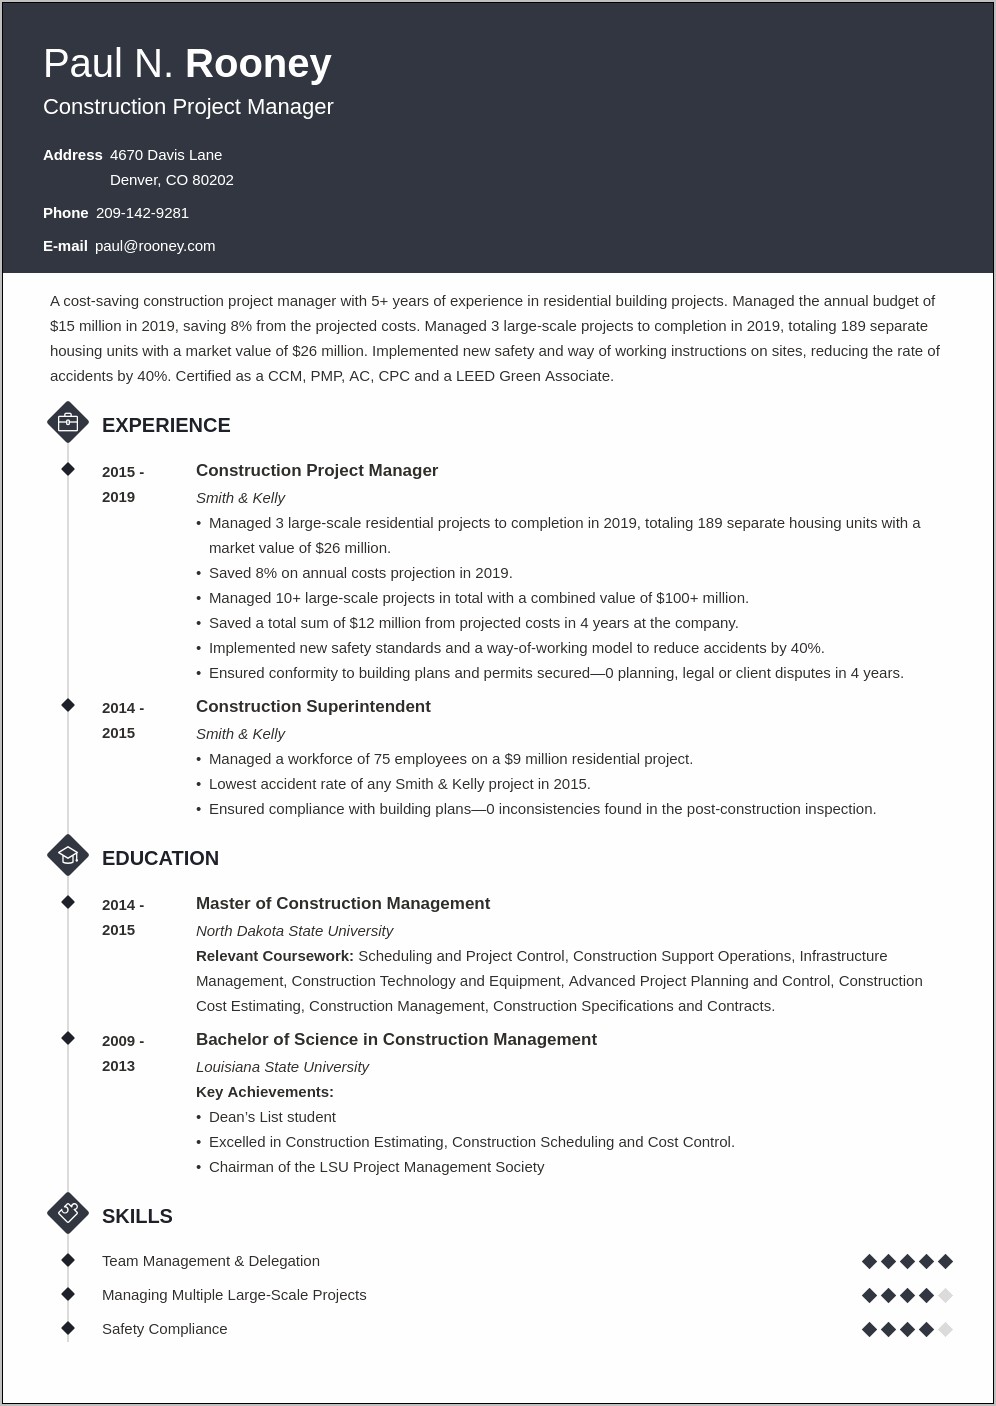 Construction Project Manager Resume Profile